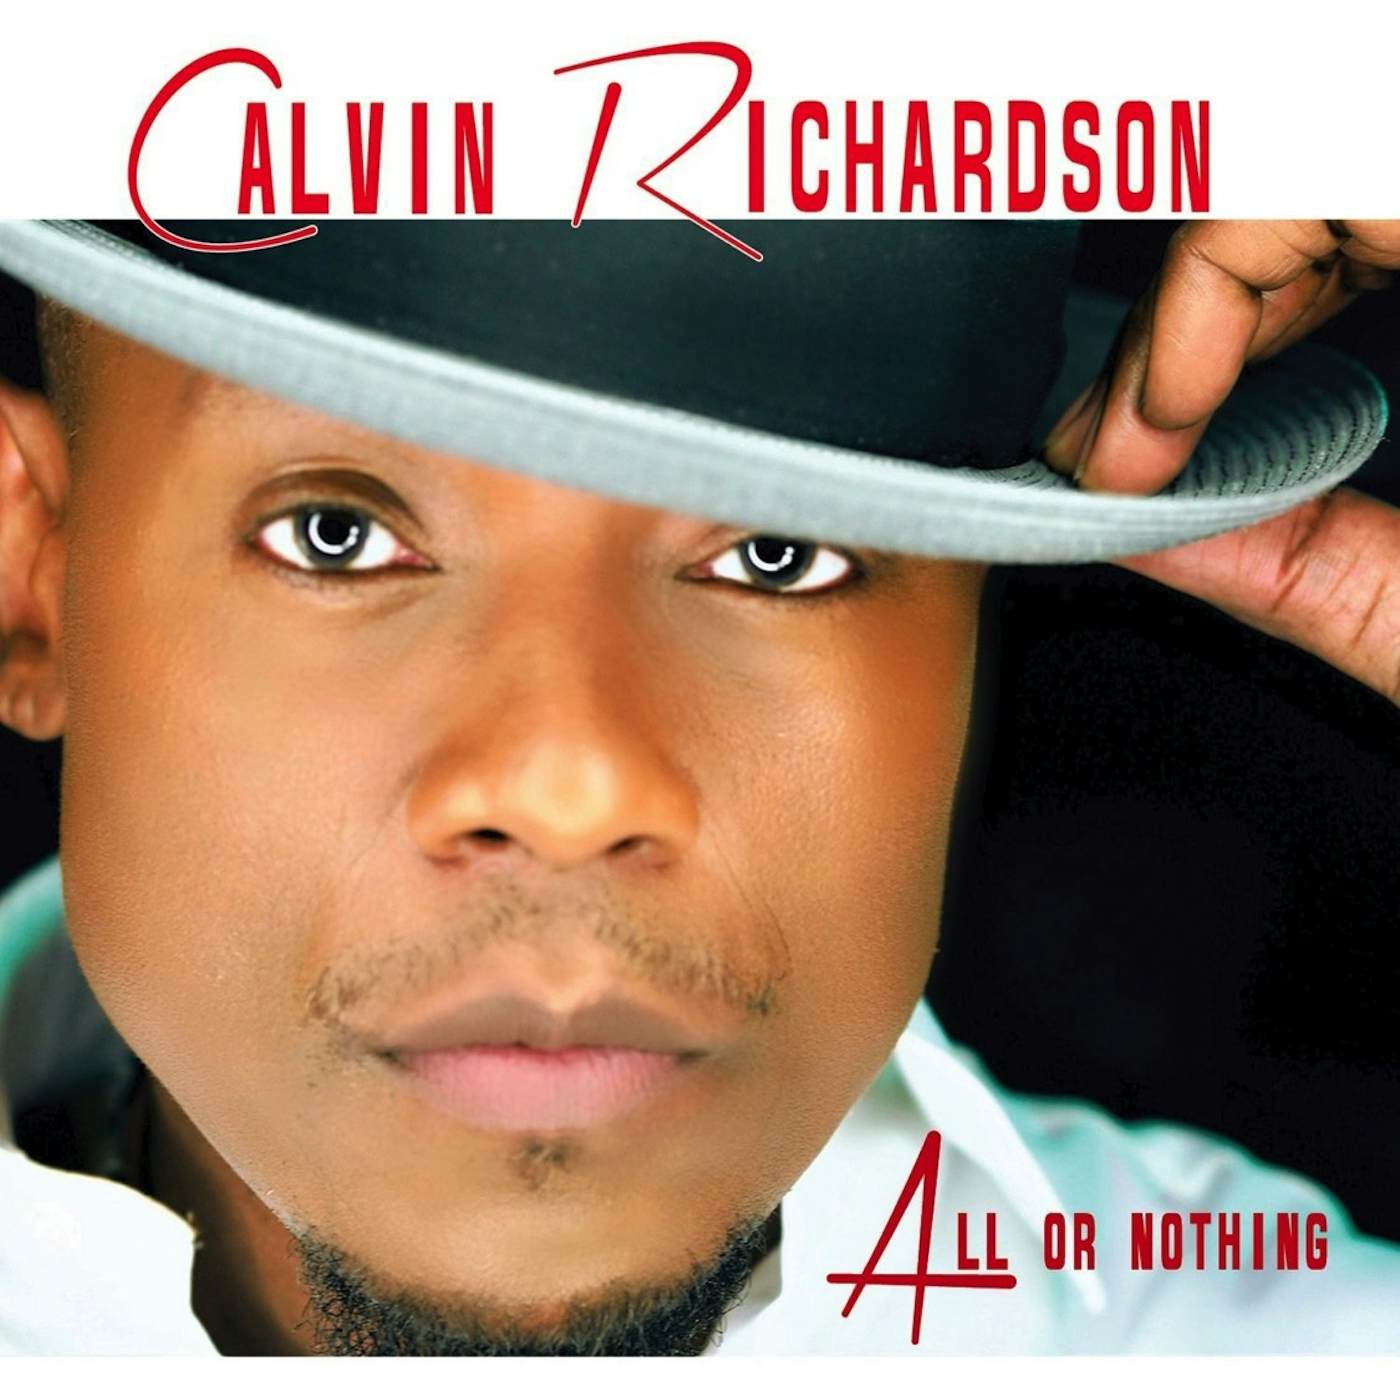 Calvin Richardson All Or Nothing CD